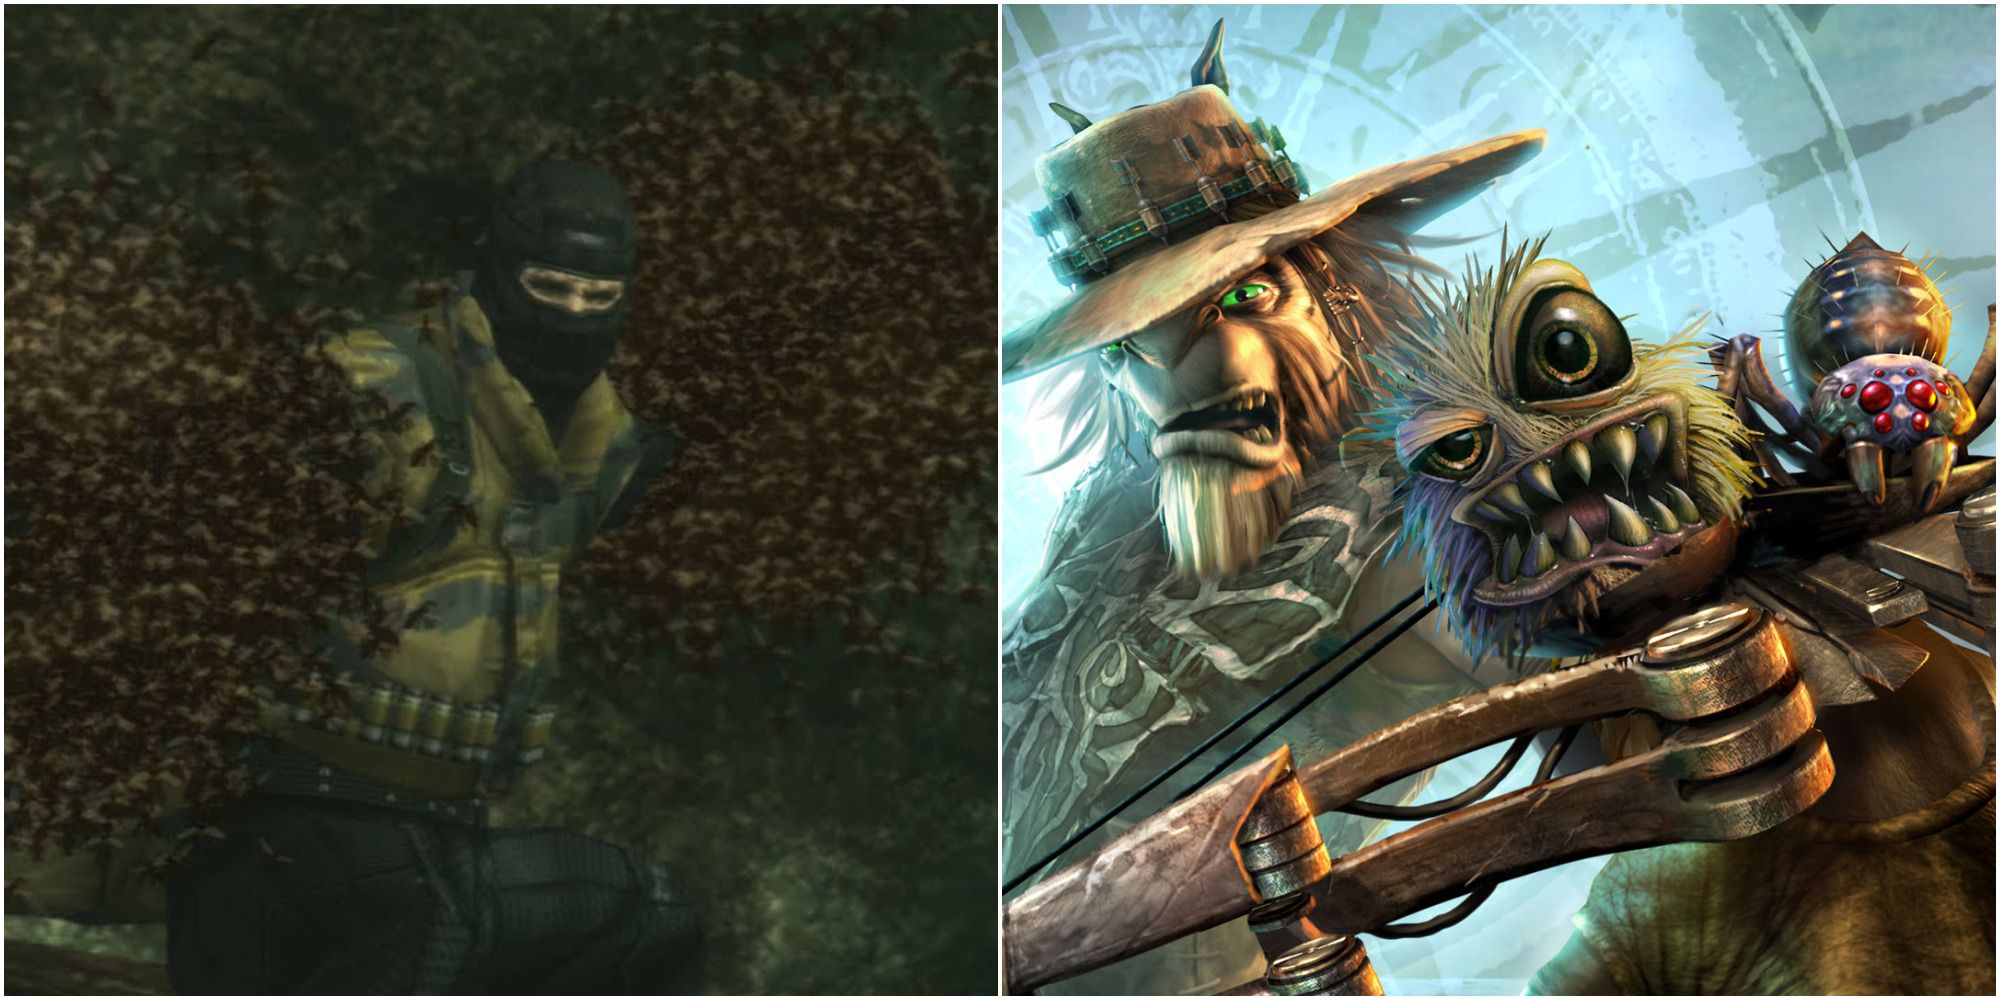 The Pain from Metal Gear Solid 3 and Stranger from Oddworld: Stranger's Wrath